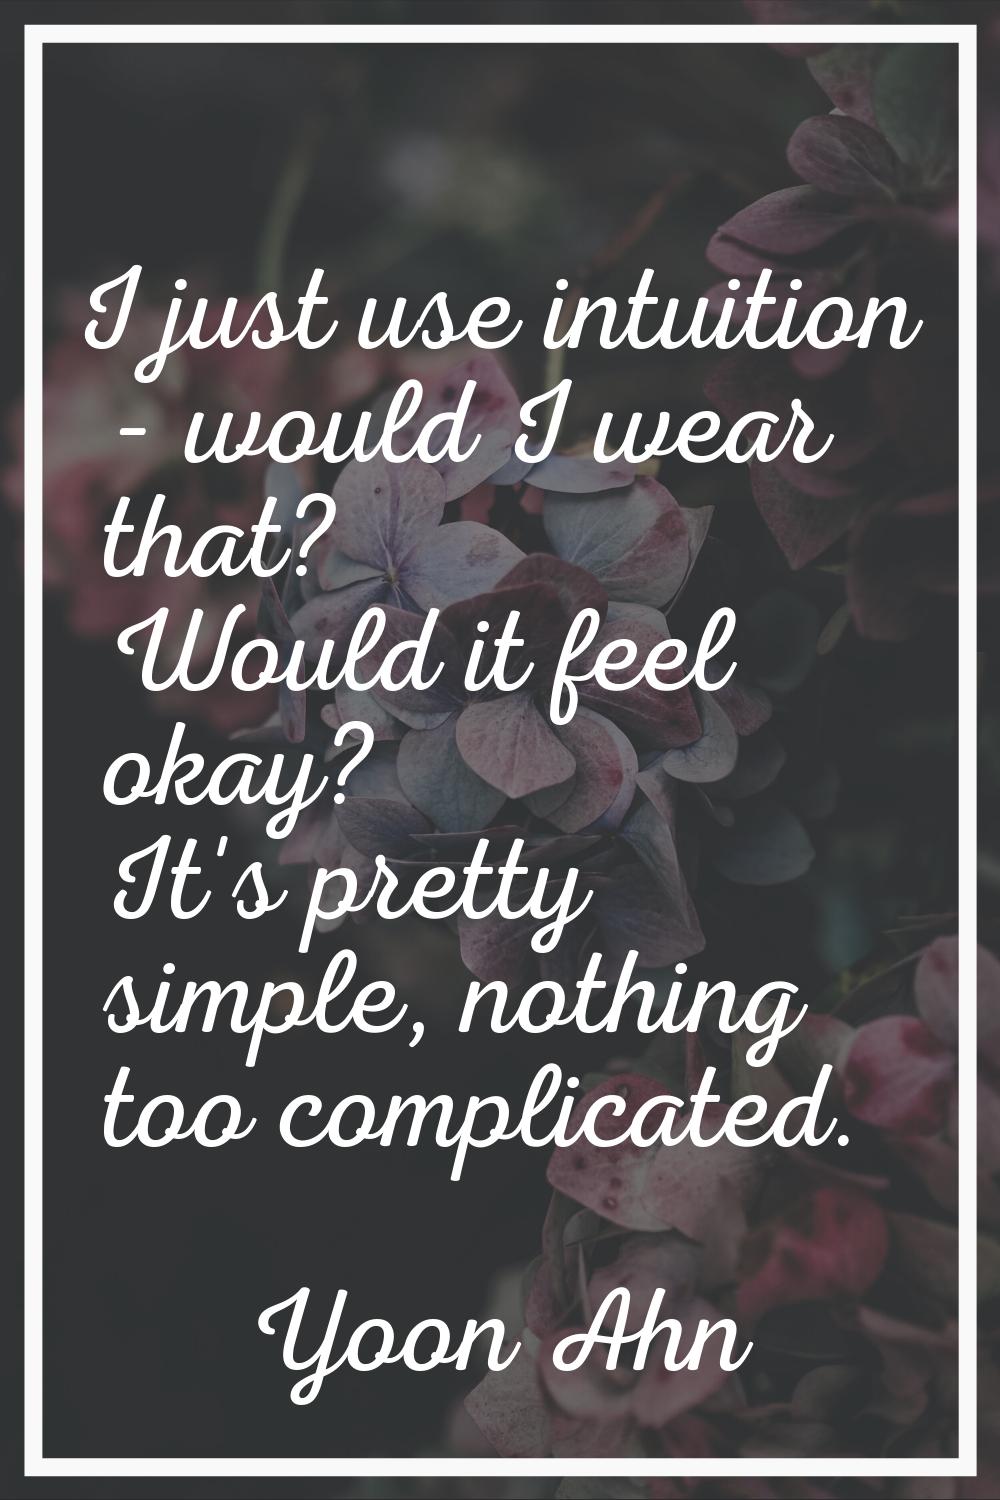 I just use intuition - would I wear that? Would it feel okay? It's pretty simple, nothing too compl